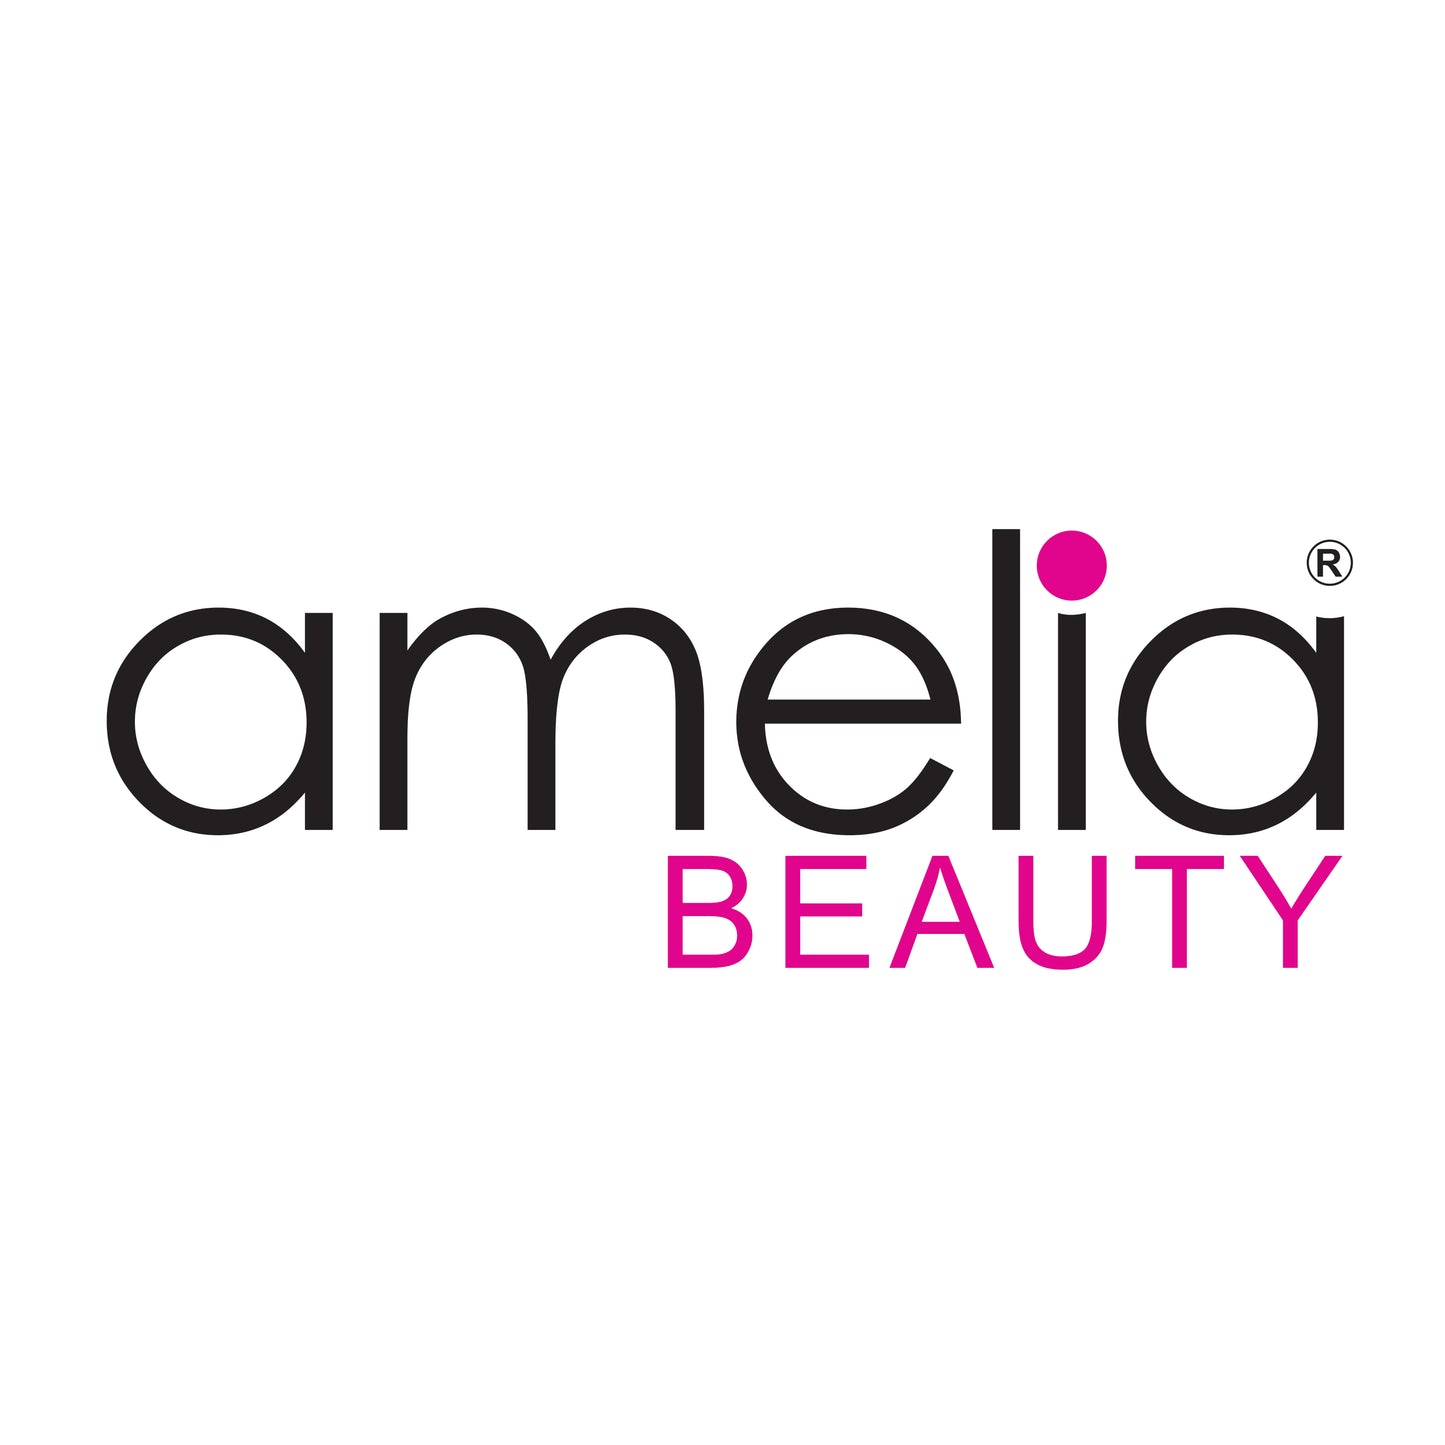 Amelia Beauty Products 8 Large Smooth Shiny Center Elastic Hair Coils, 2. 5in Diameter Thick Spiral Hair Ties, Gentle on Hair, Strong Hold and Minimizes Dents and Creases, Pink, Silver and Purple Mix